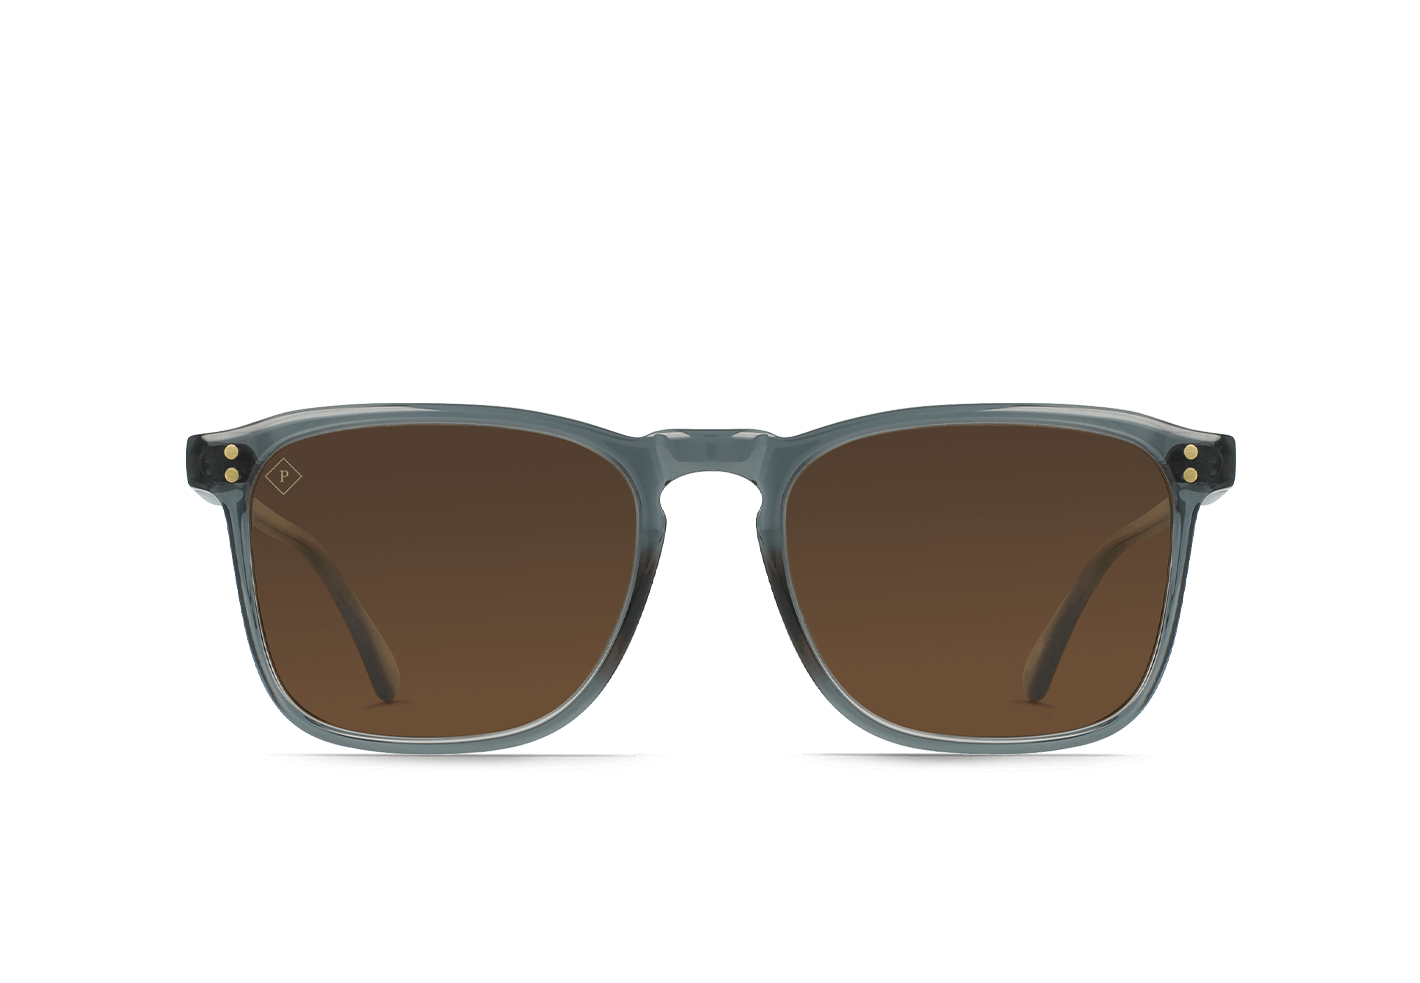 WILEY - SLATE / VIBRANT BROWN POLARIZED - Size 54